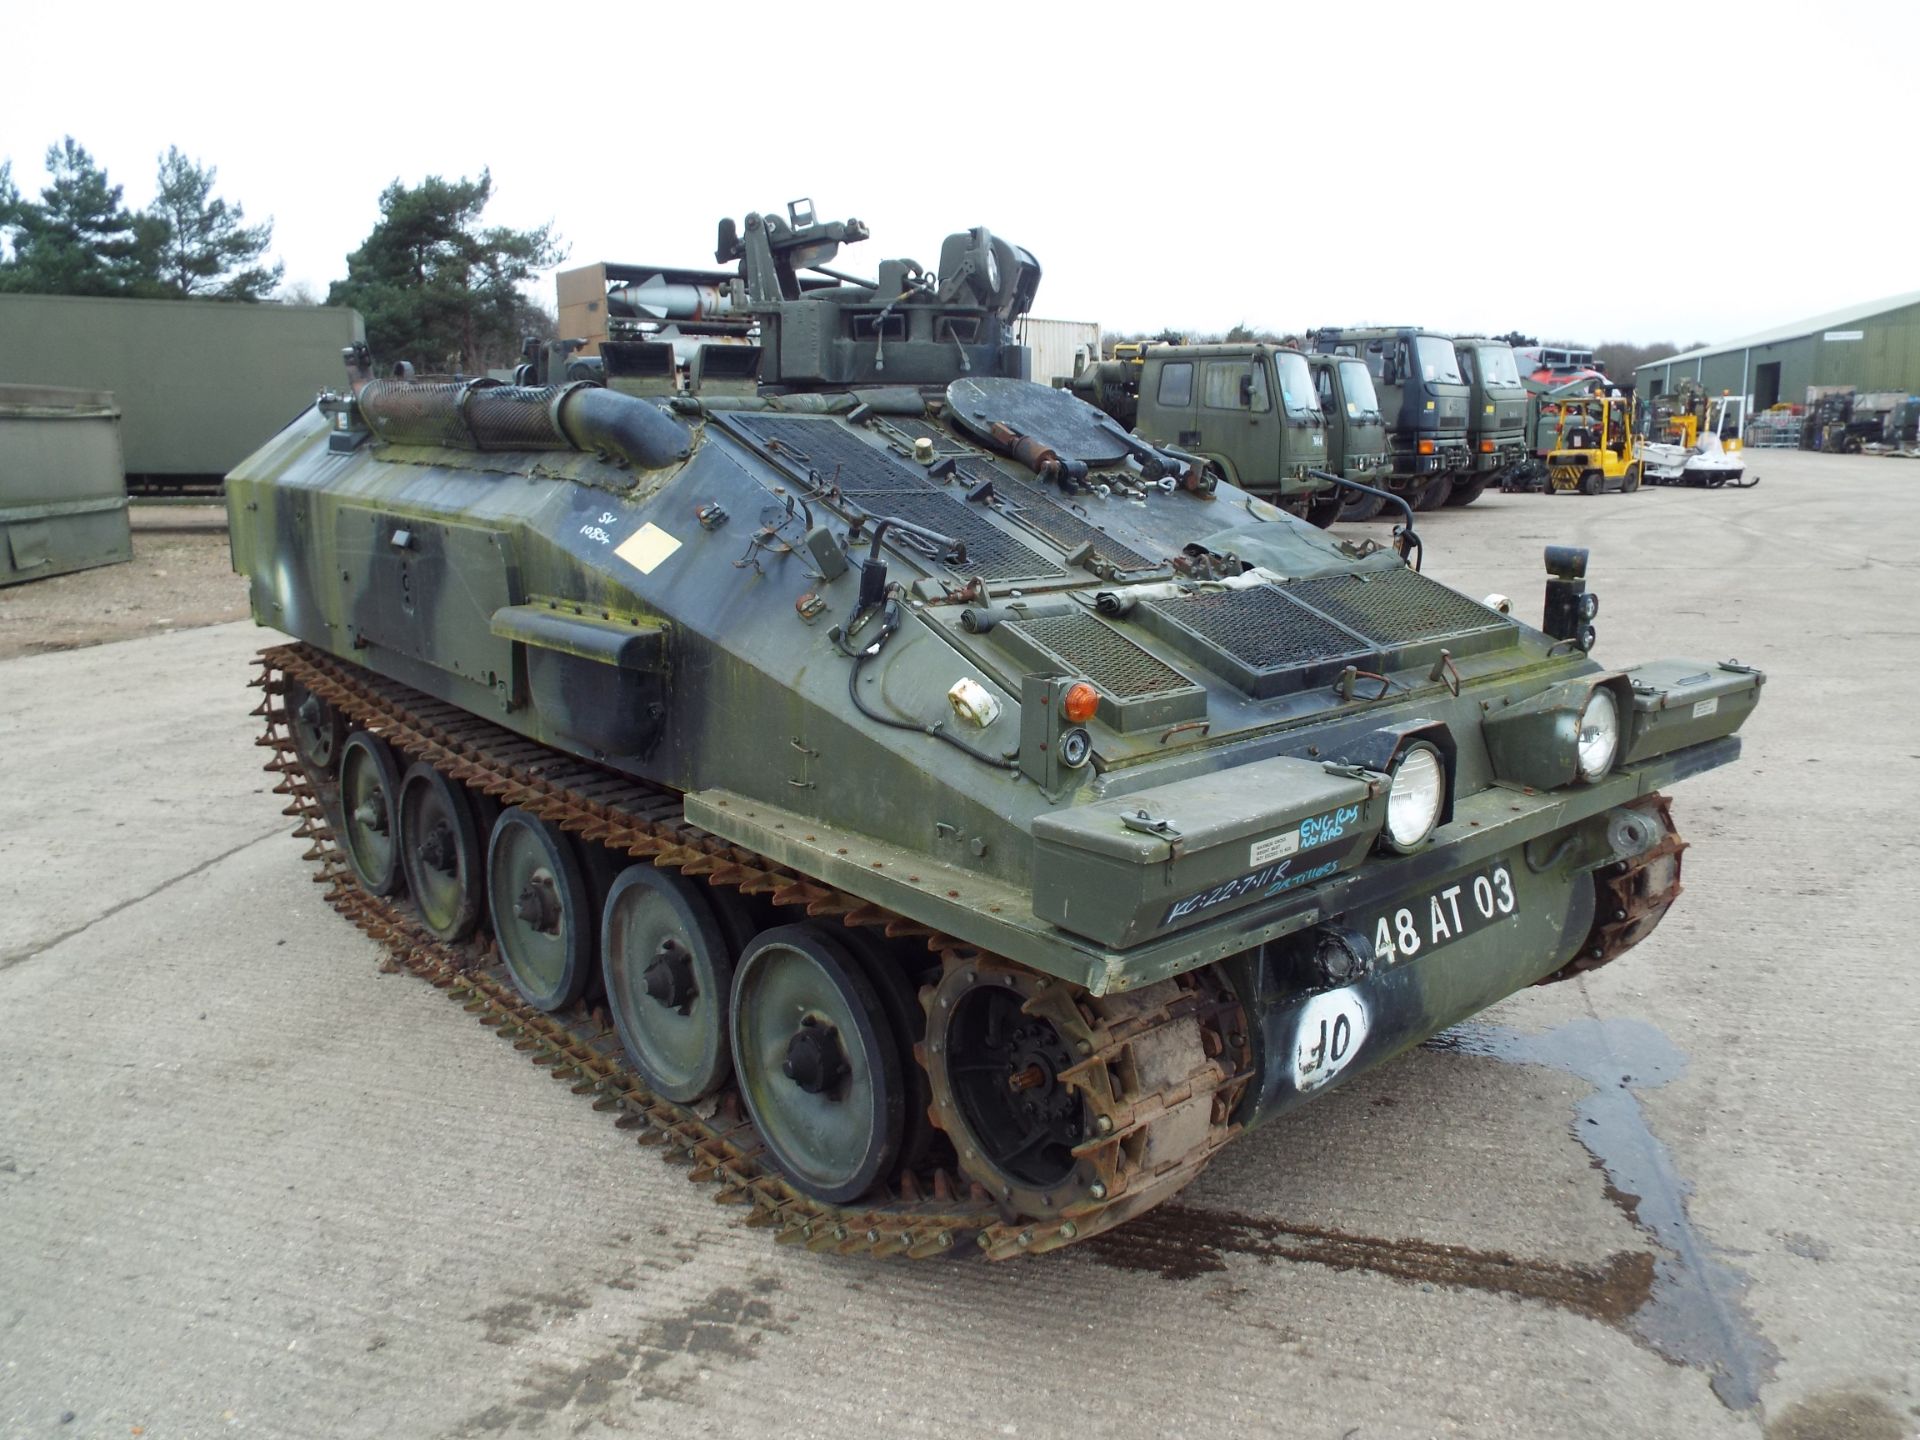 Dieselised CVRT (Combat Vehicle Reconnaissance Tracked) Spartan Armoured Personnel Carrier